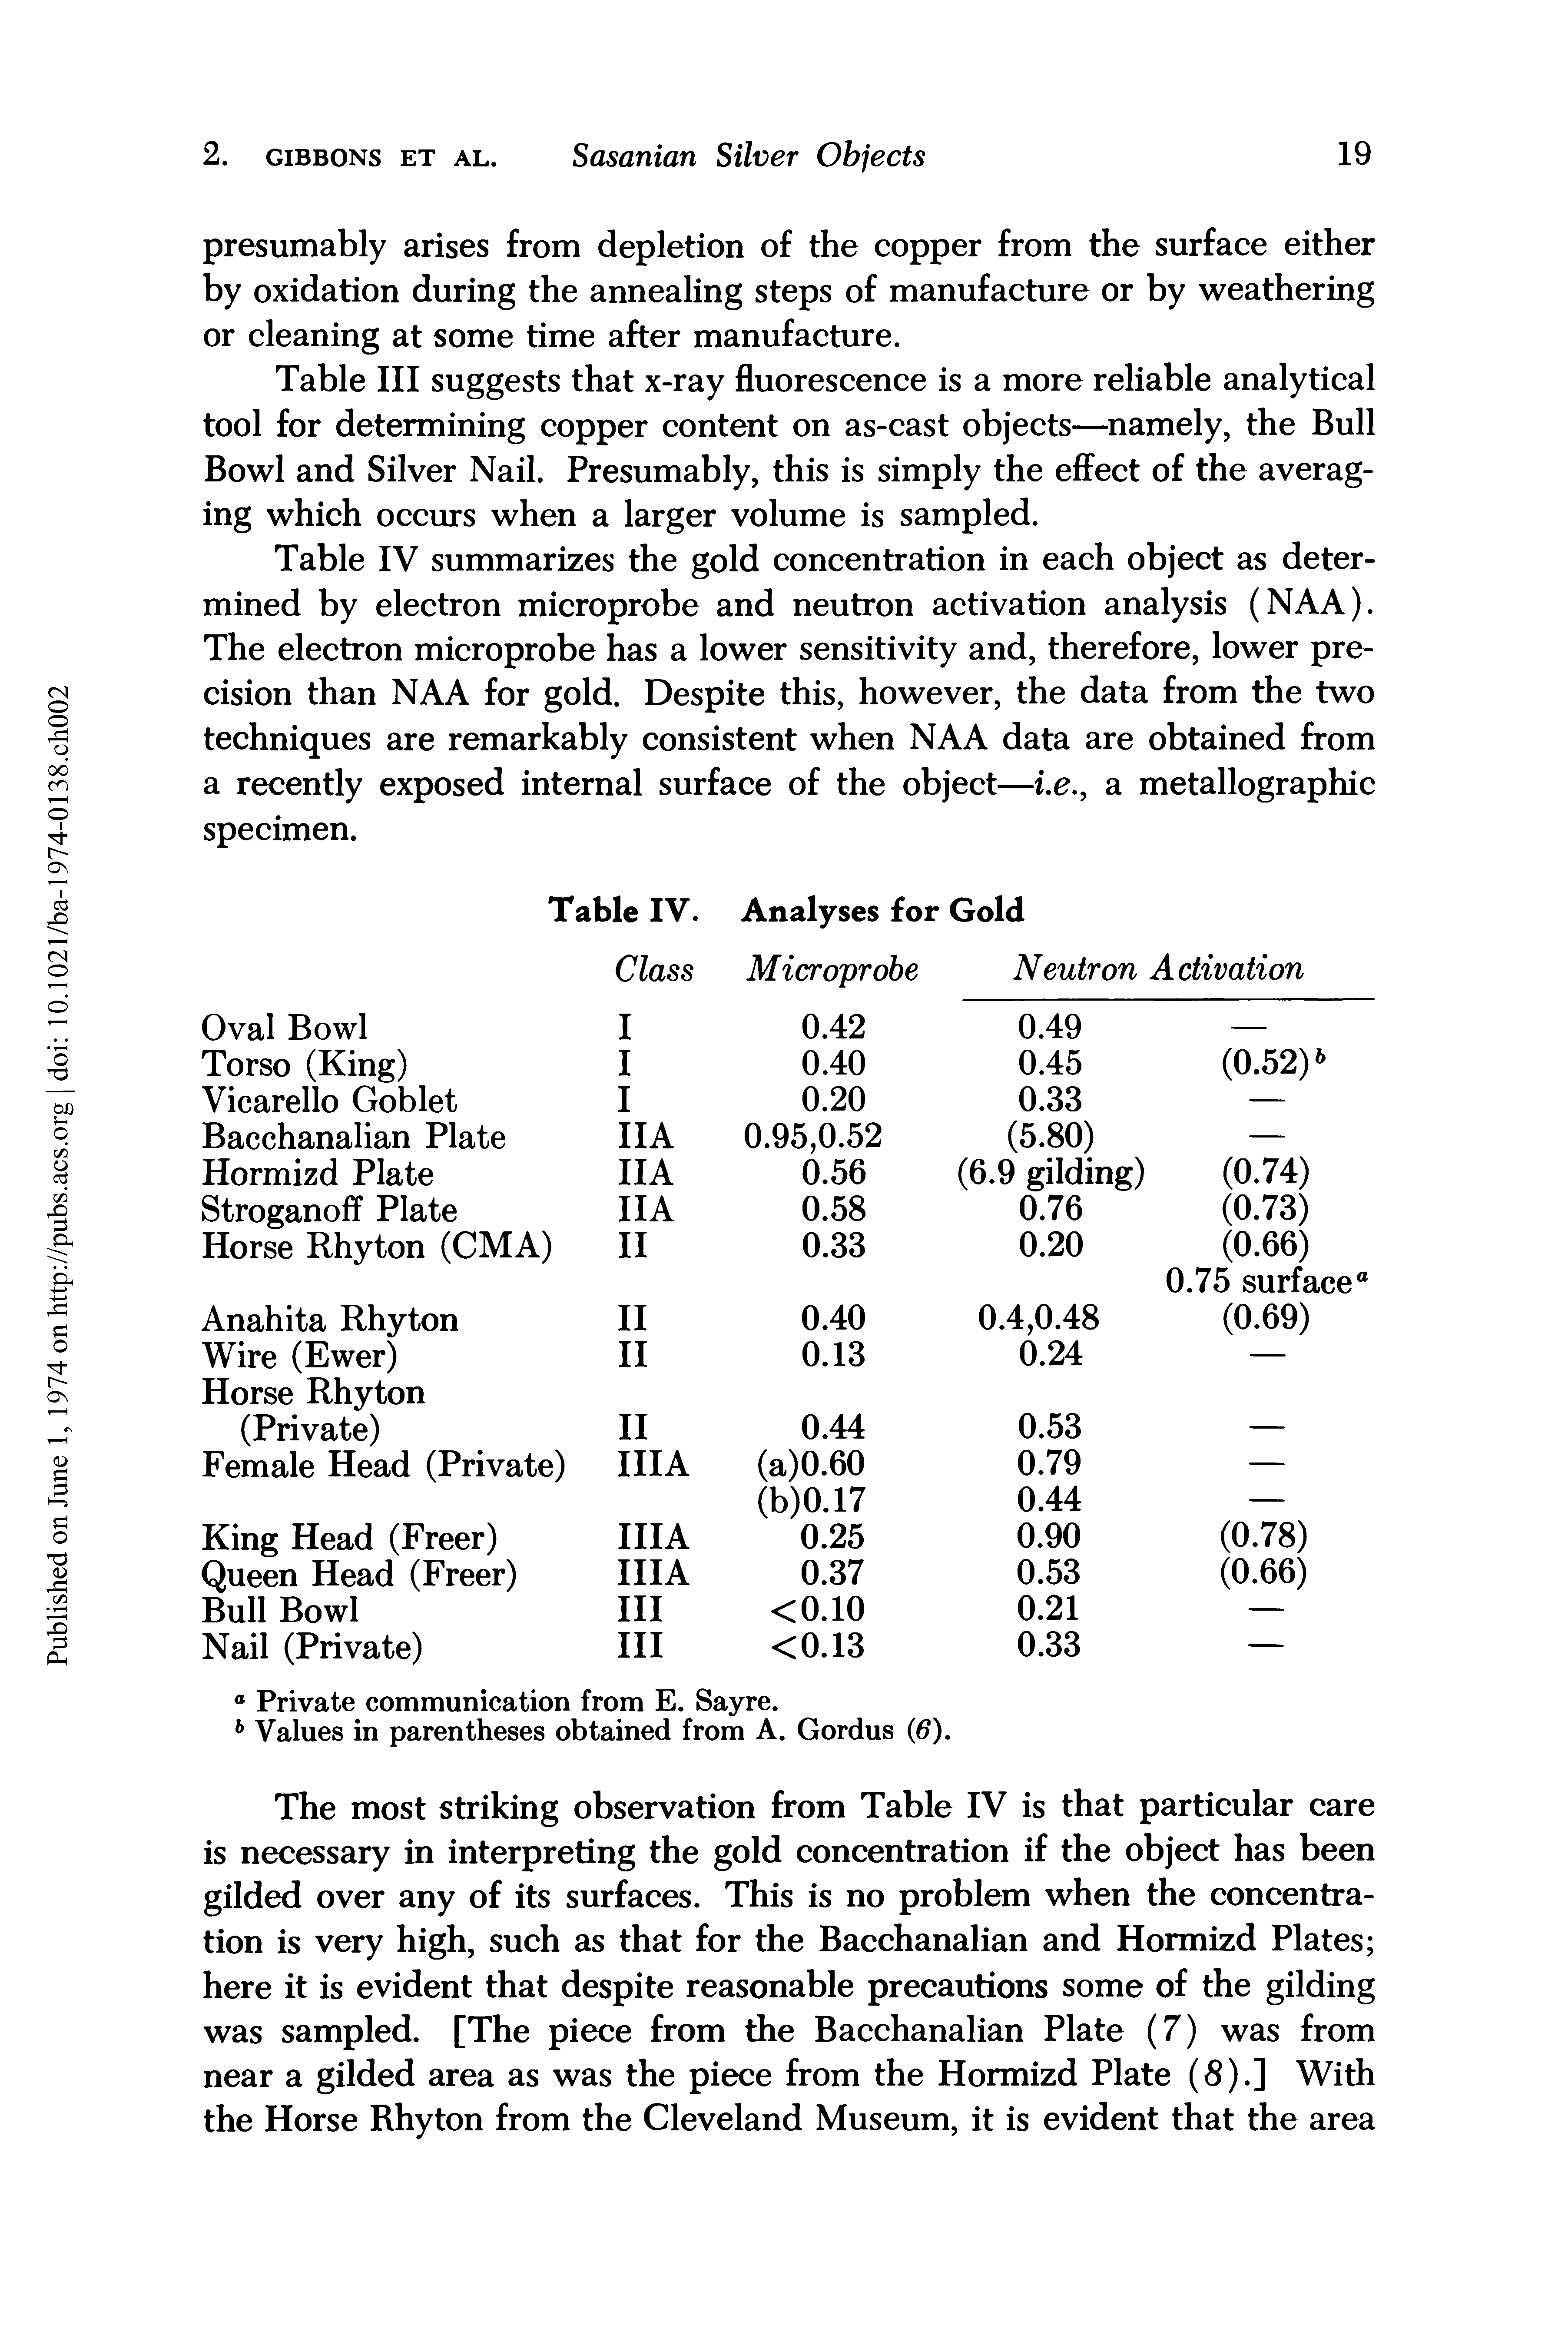 Table IV summarizes the gold concentration in each object as determined by electron microprobe and neutron activation analysis (NAA). The electron microprobe has a lower sensitivity and, therefore, lower precision than NAA for gold. Despite this, however, the data from the two techniques are remarkably consistent when NAA data are obtained from a recently exposed internal surface of the object—i.e., a metallographic specimen.